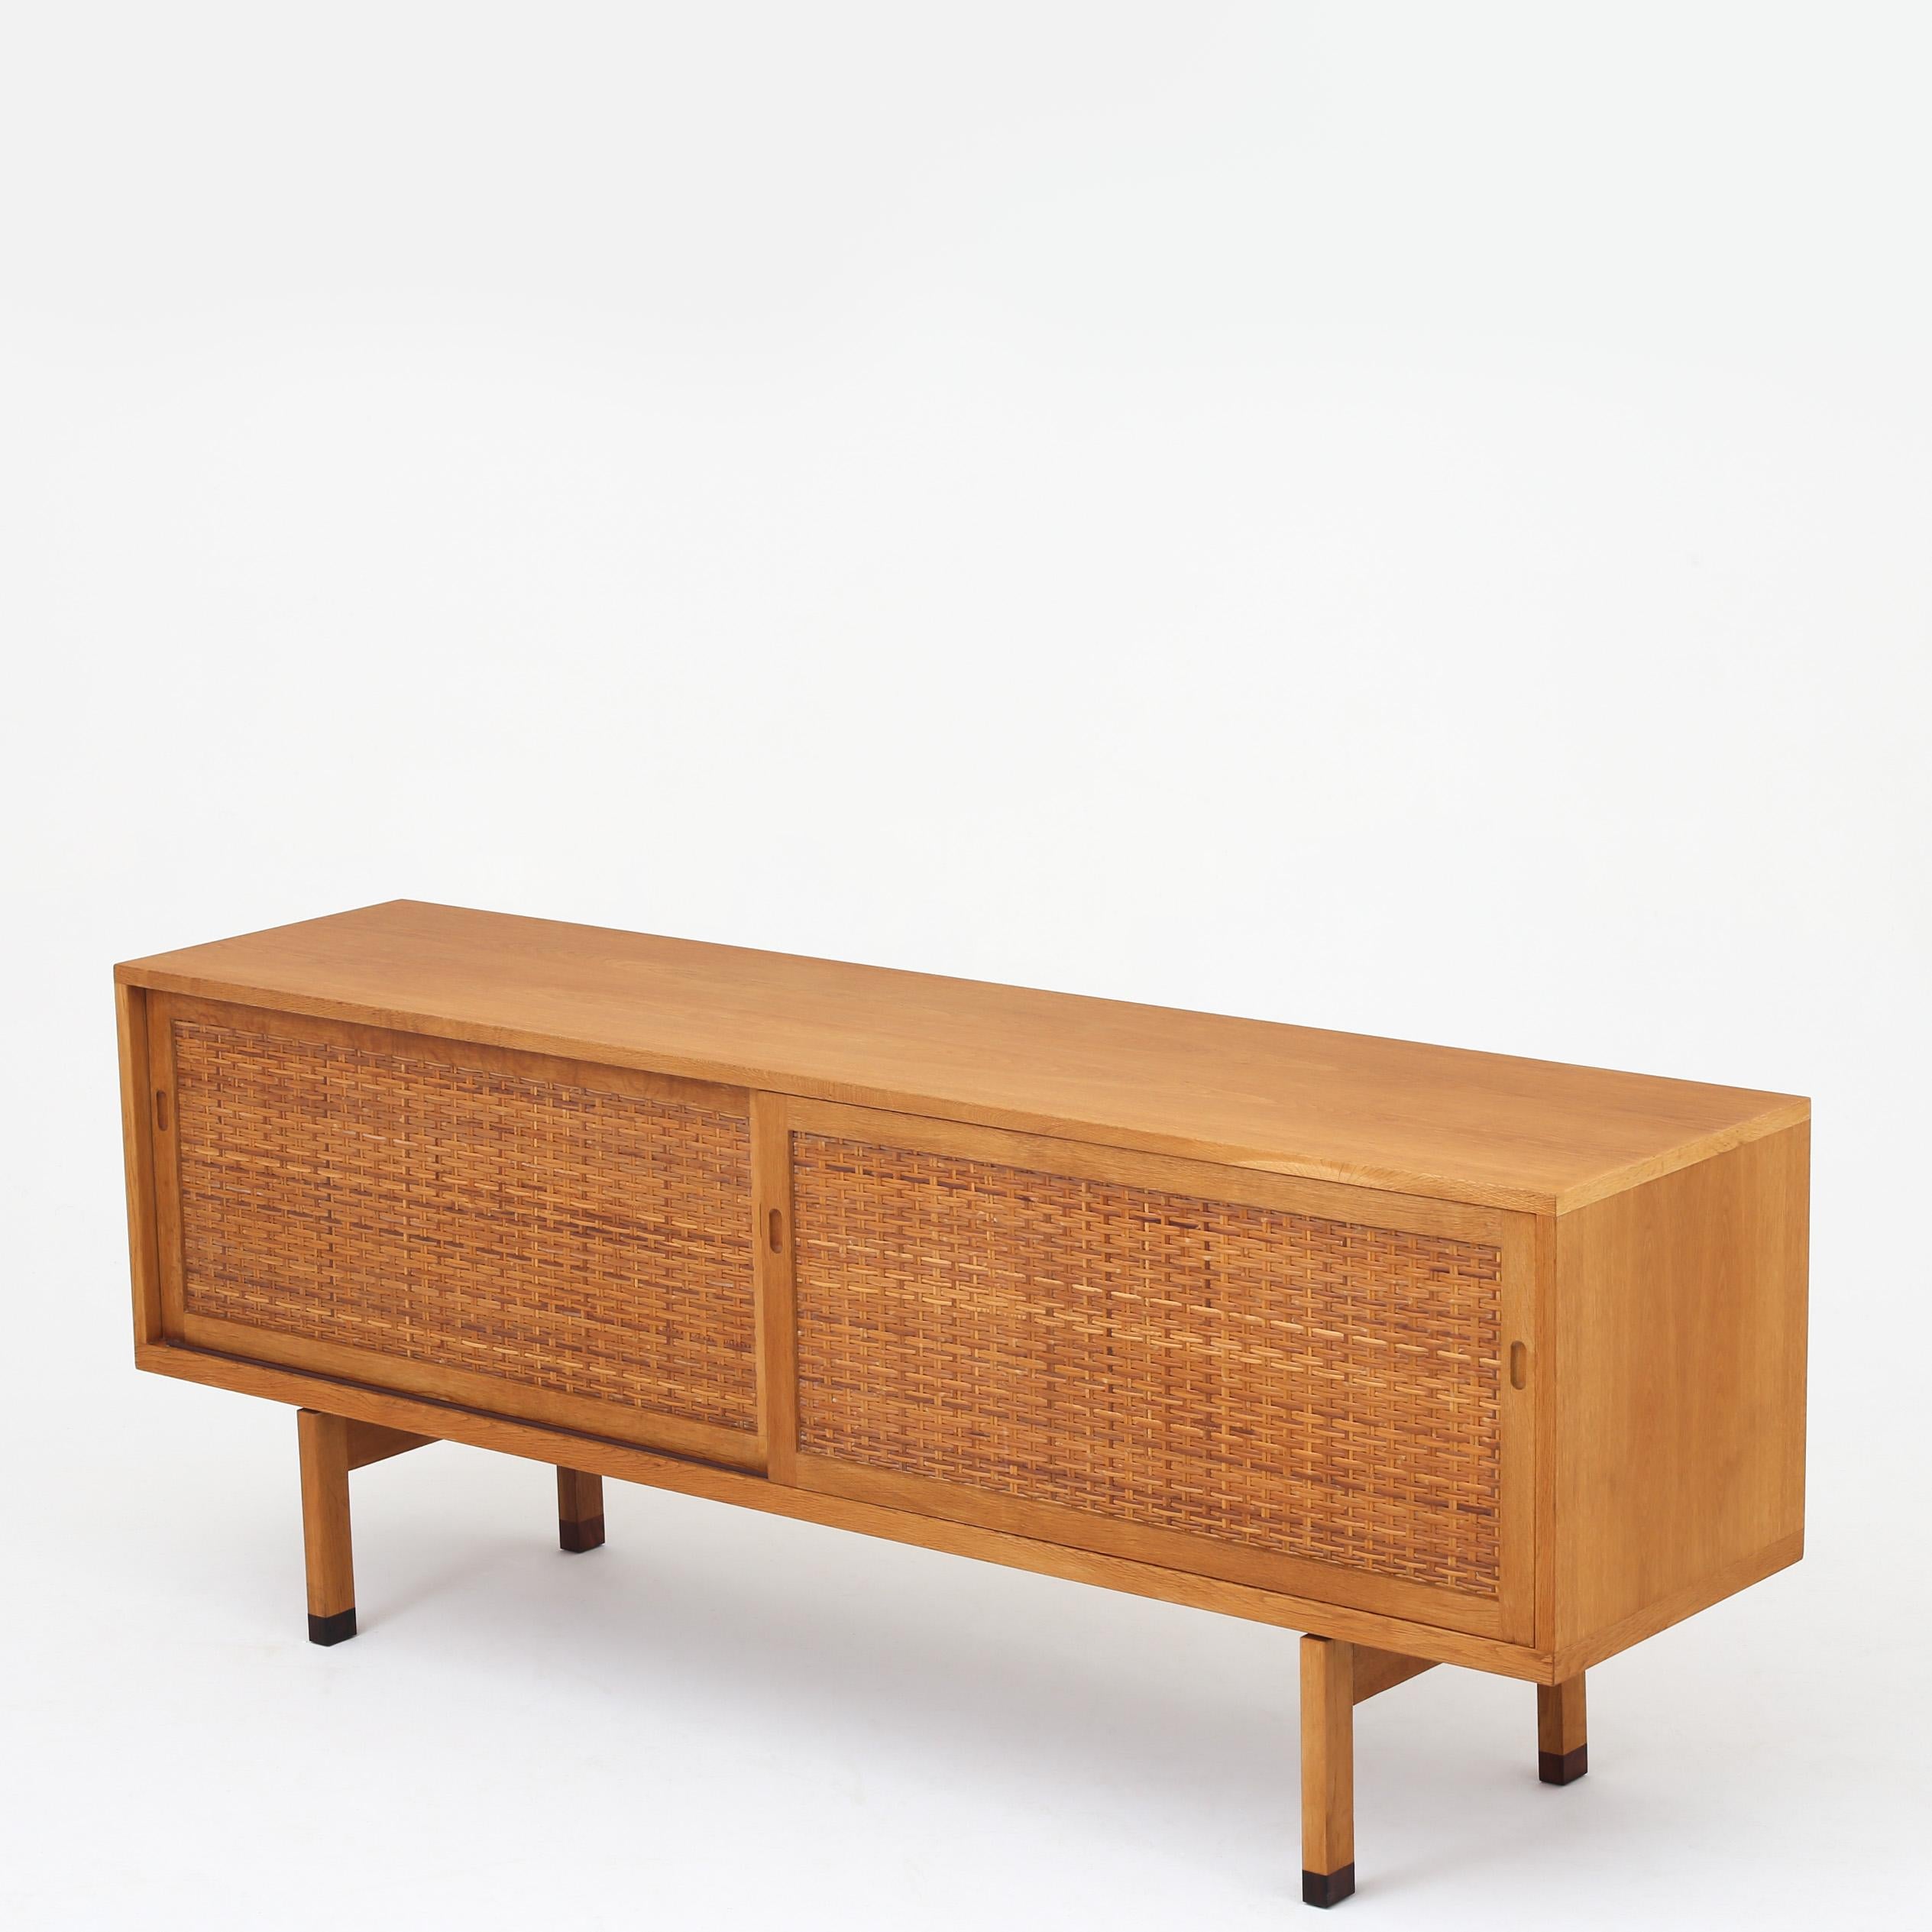 Hans J. Wegner RY 26 - Sideboard in patinated oak and cane with square legs. Maker RY Møbler.